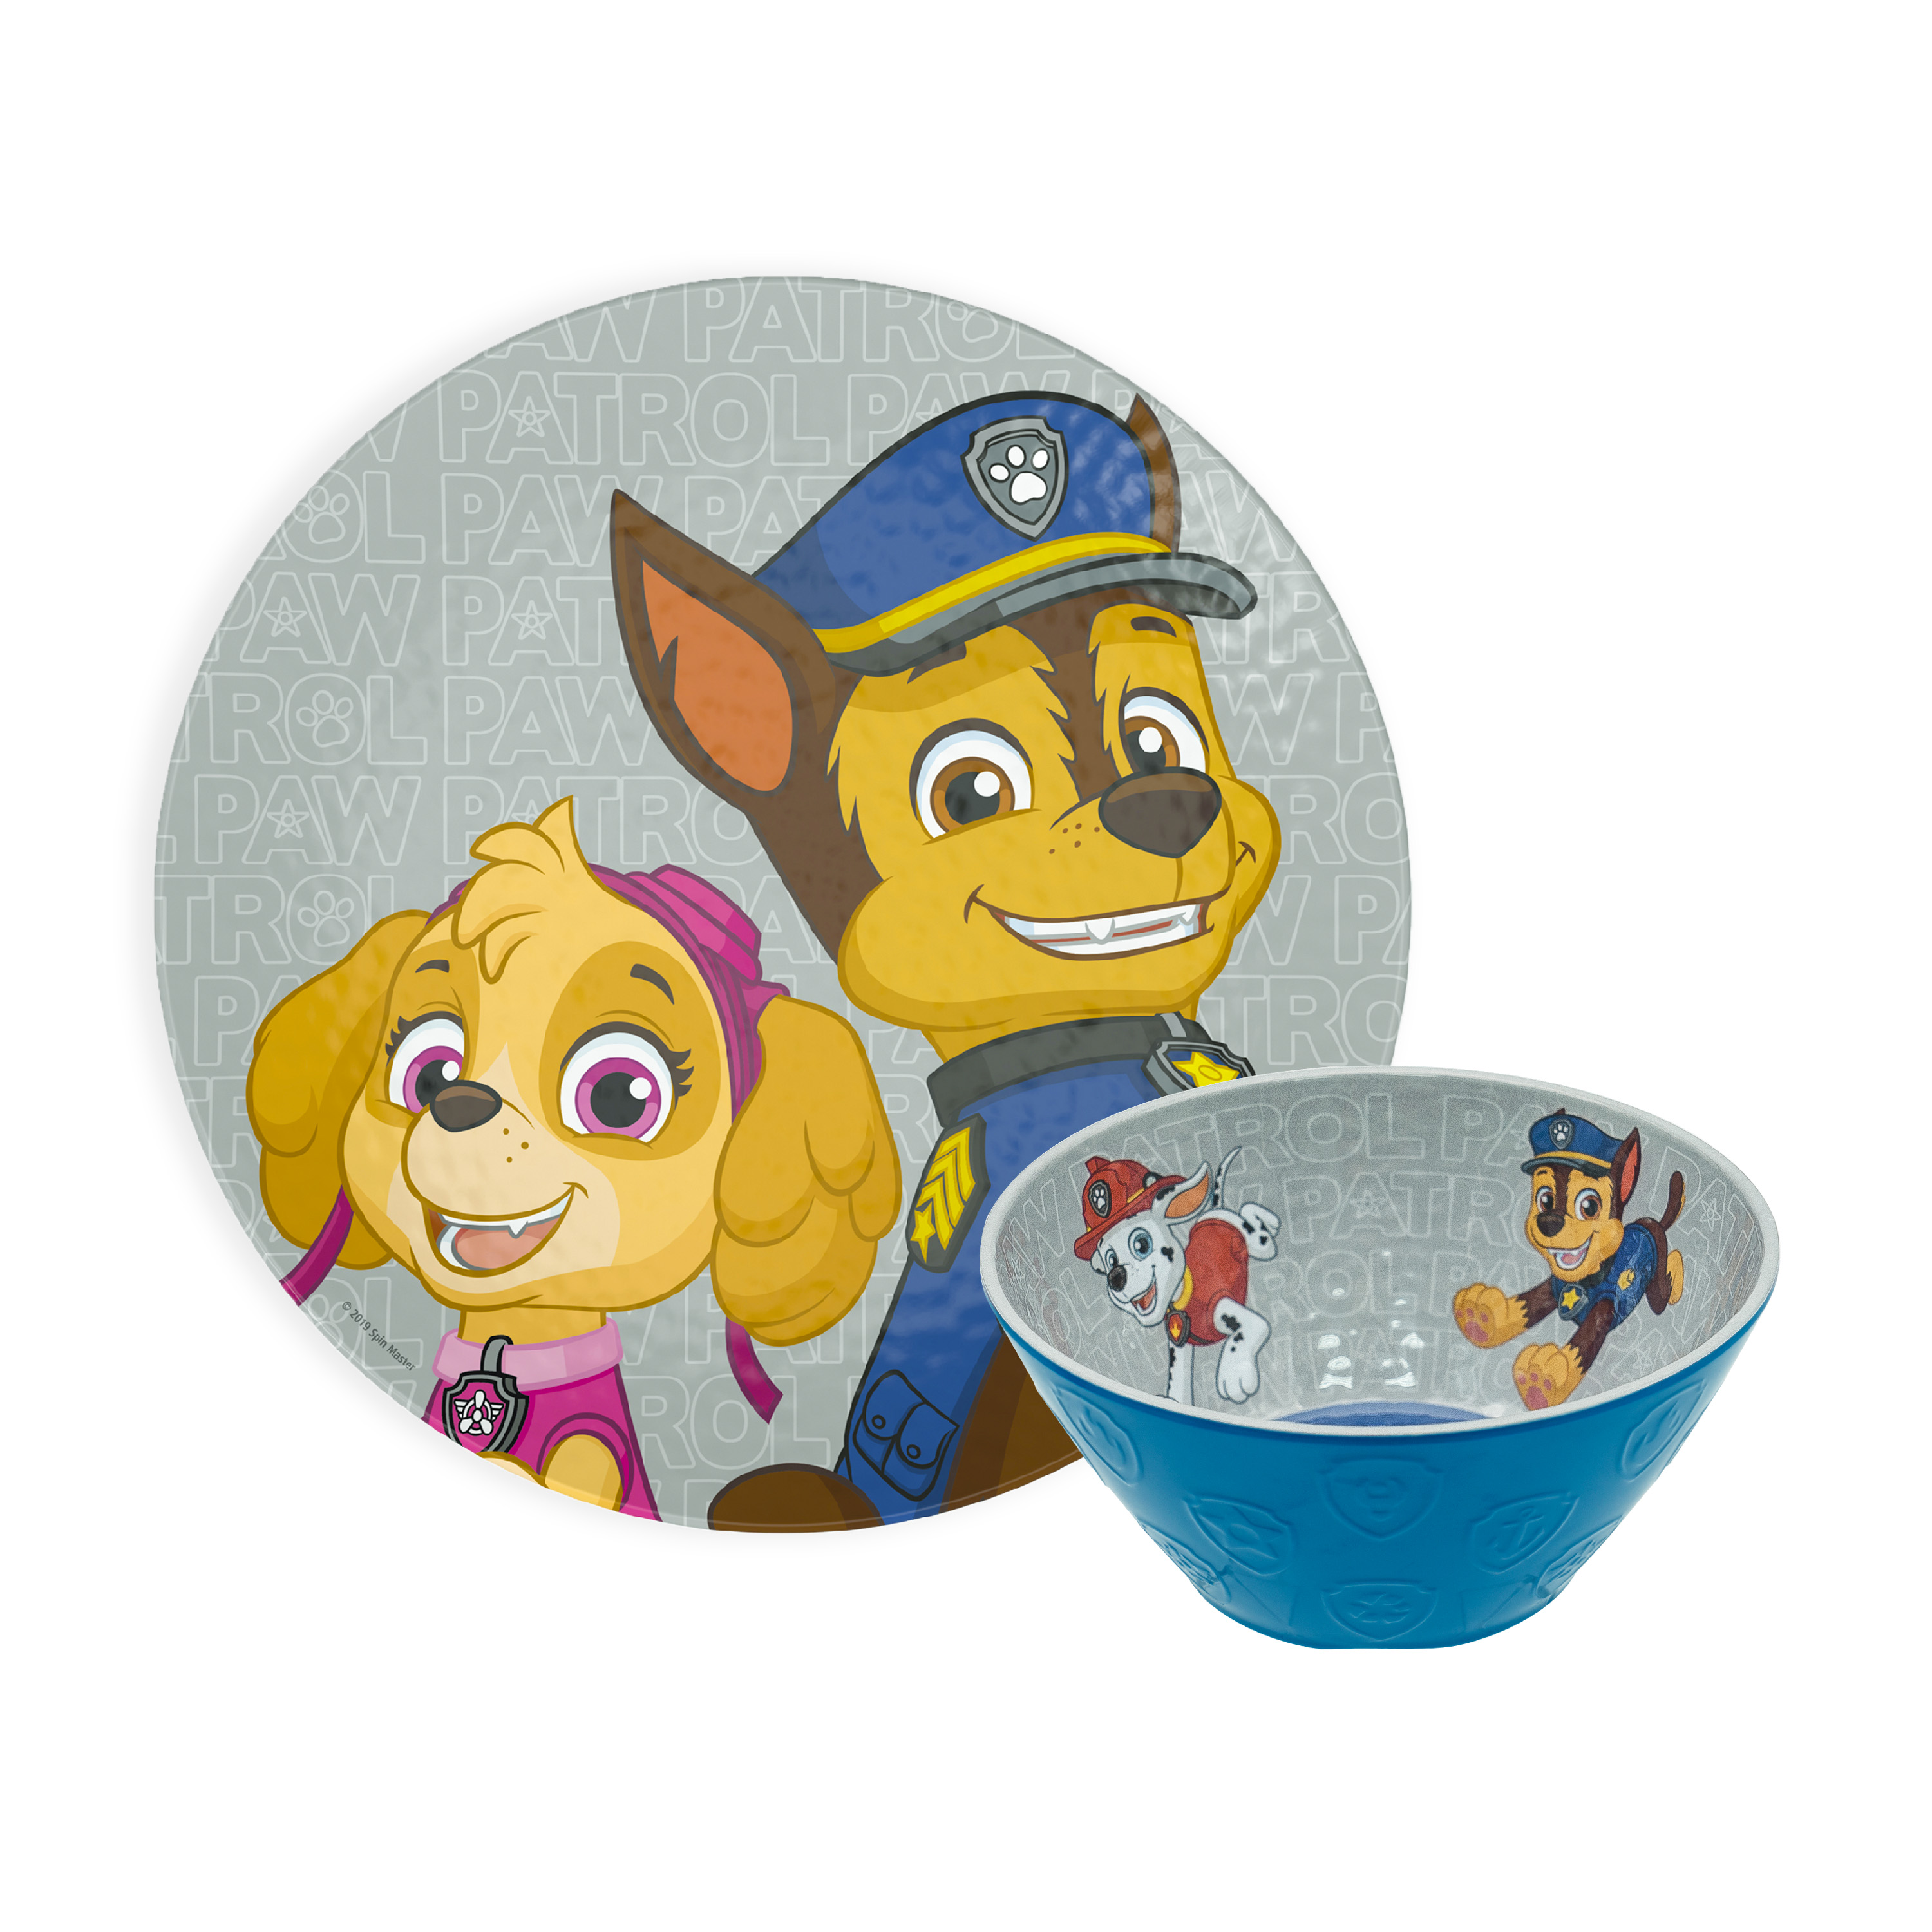 Paw patrol Kids 9-inch Plate and 6-inch Bowl Set, Chase, Skye and Friends, 2-piece set slideshow image 1